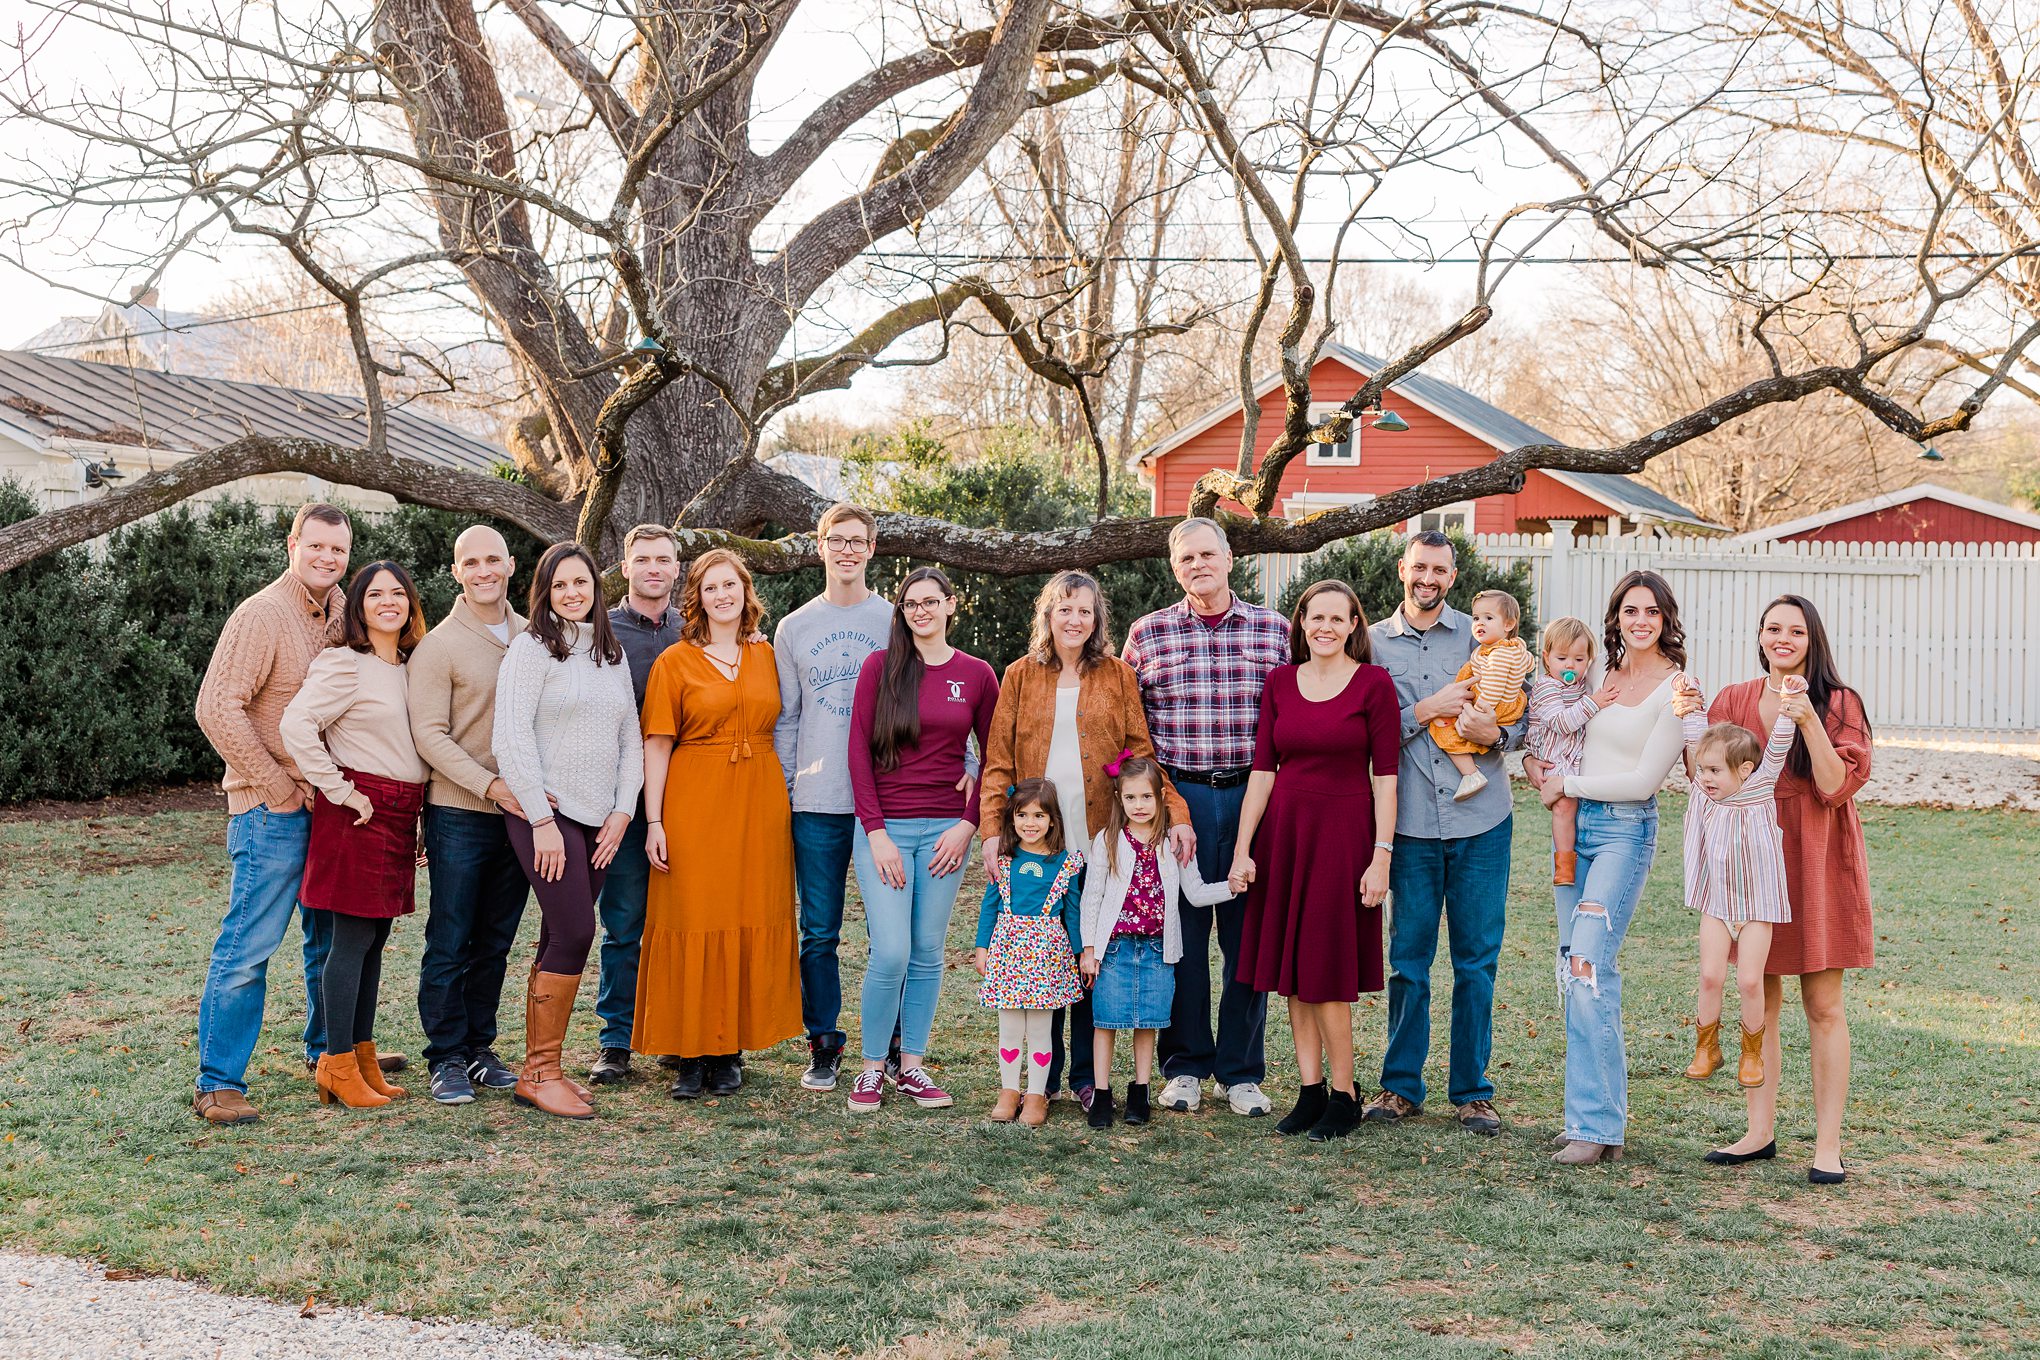 large outdoor extended family photo